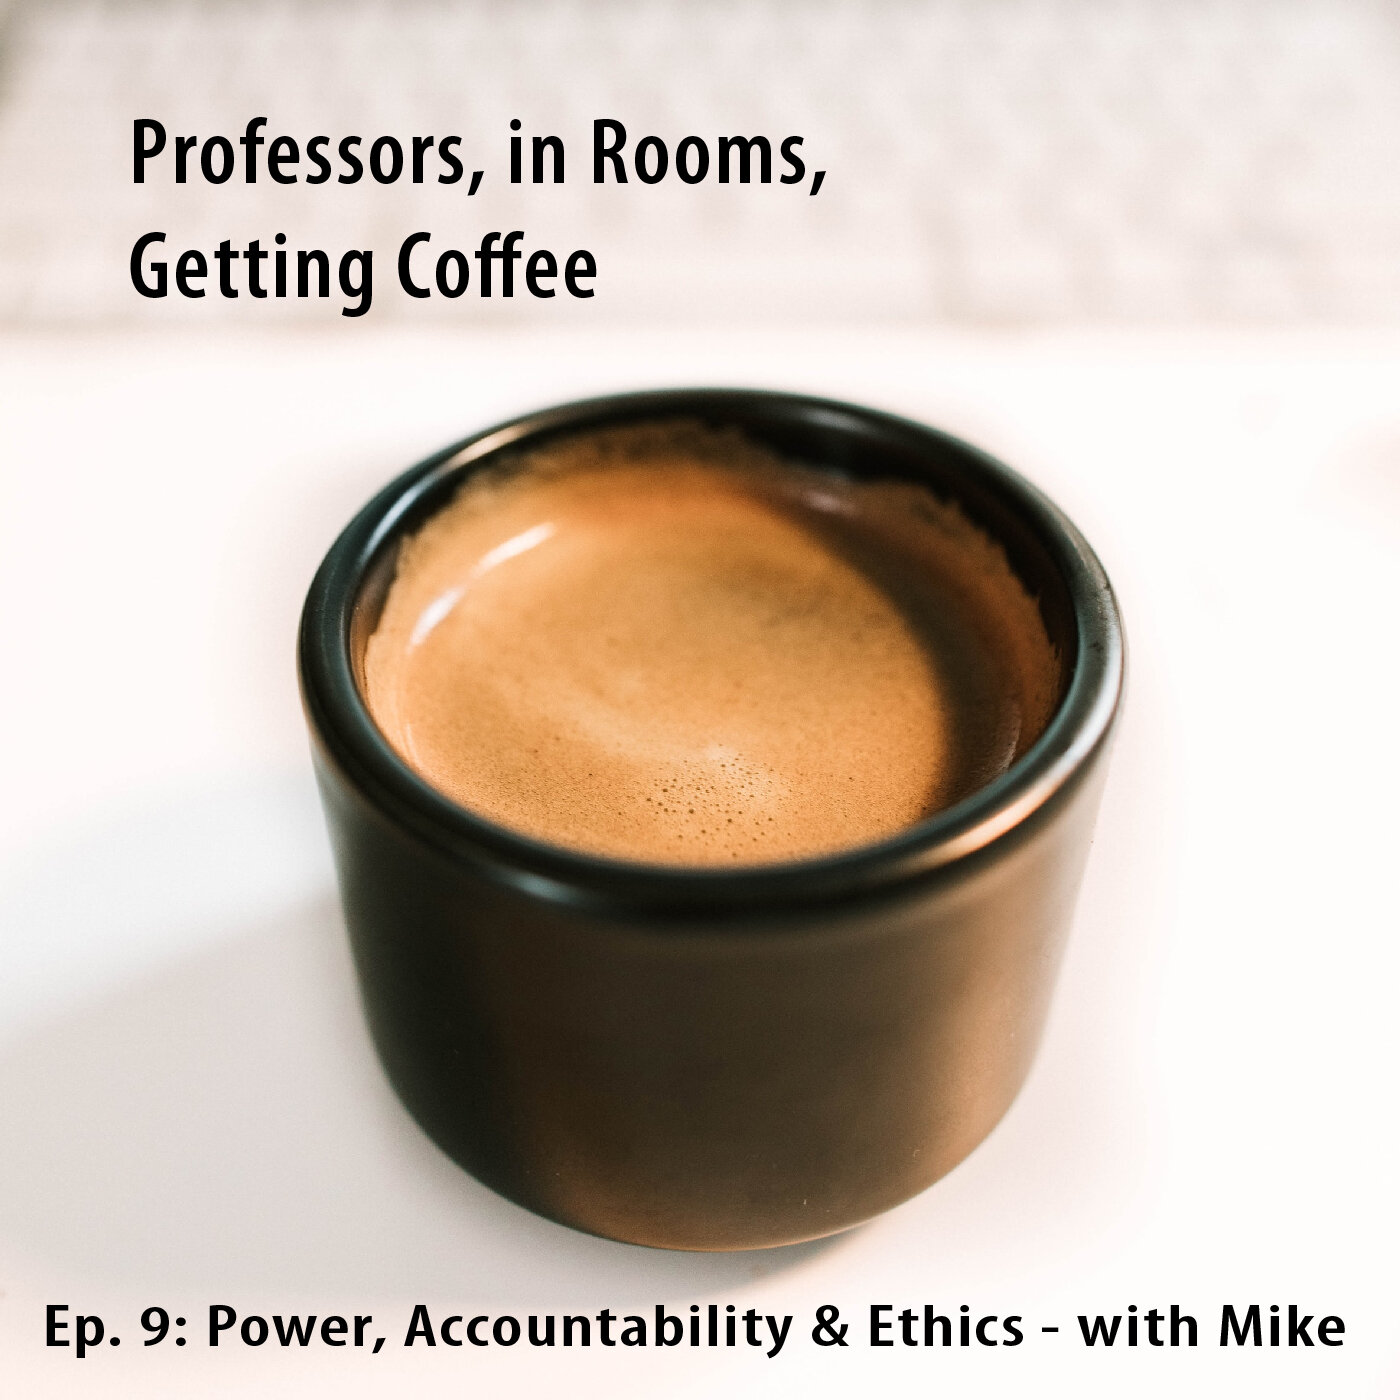 Power, Accountability, and Ethics - with Mike